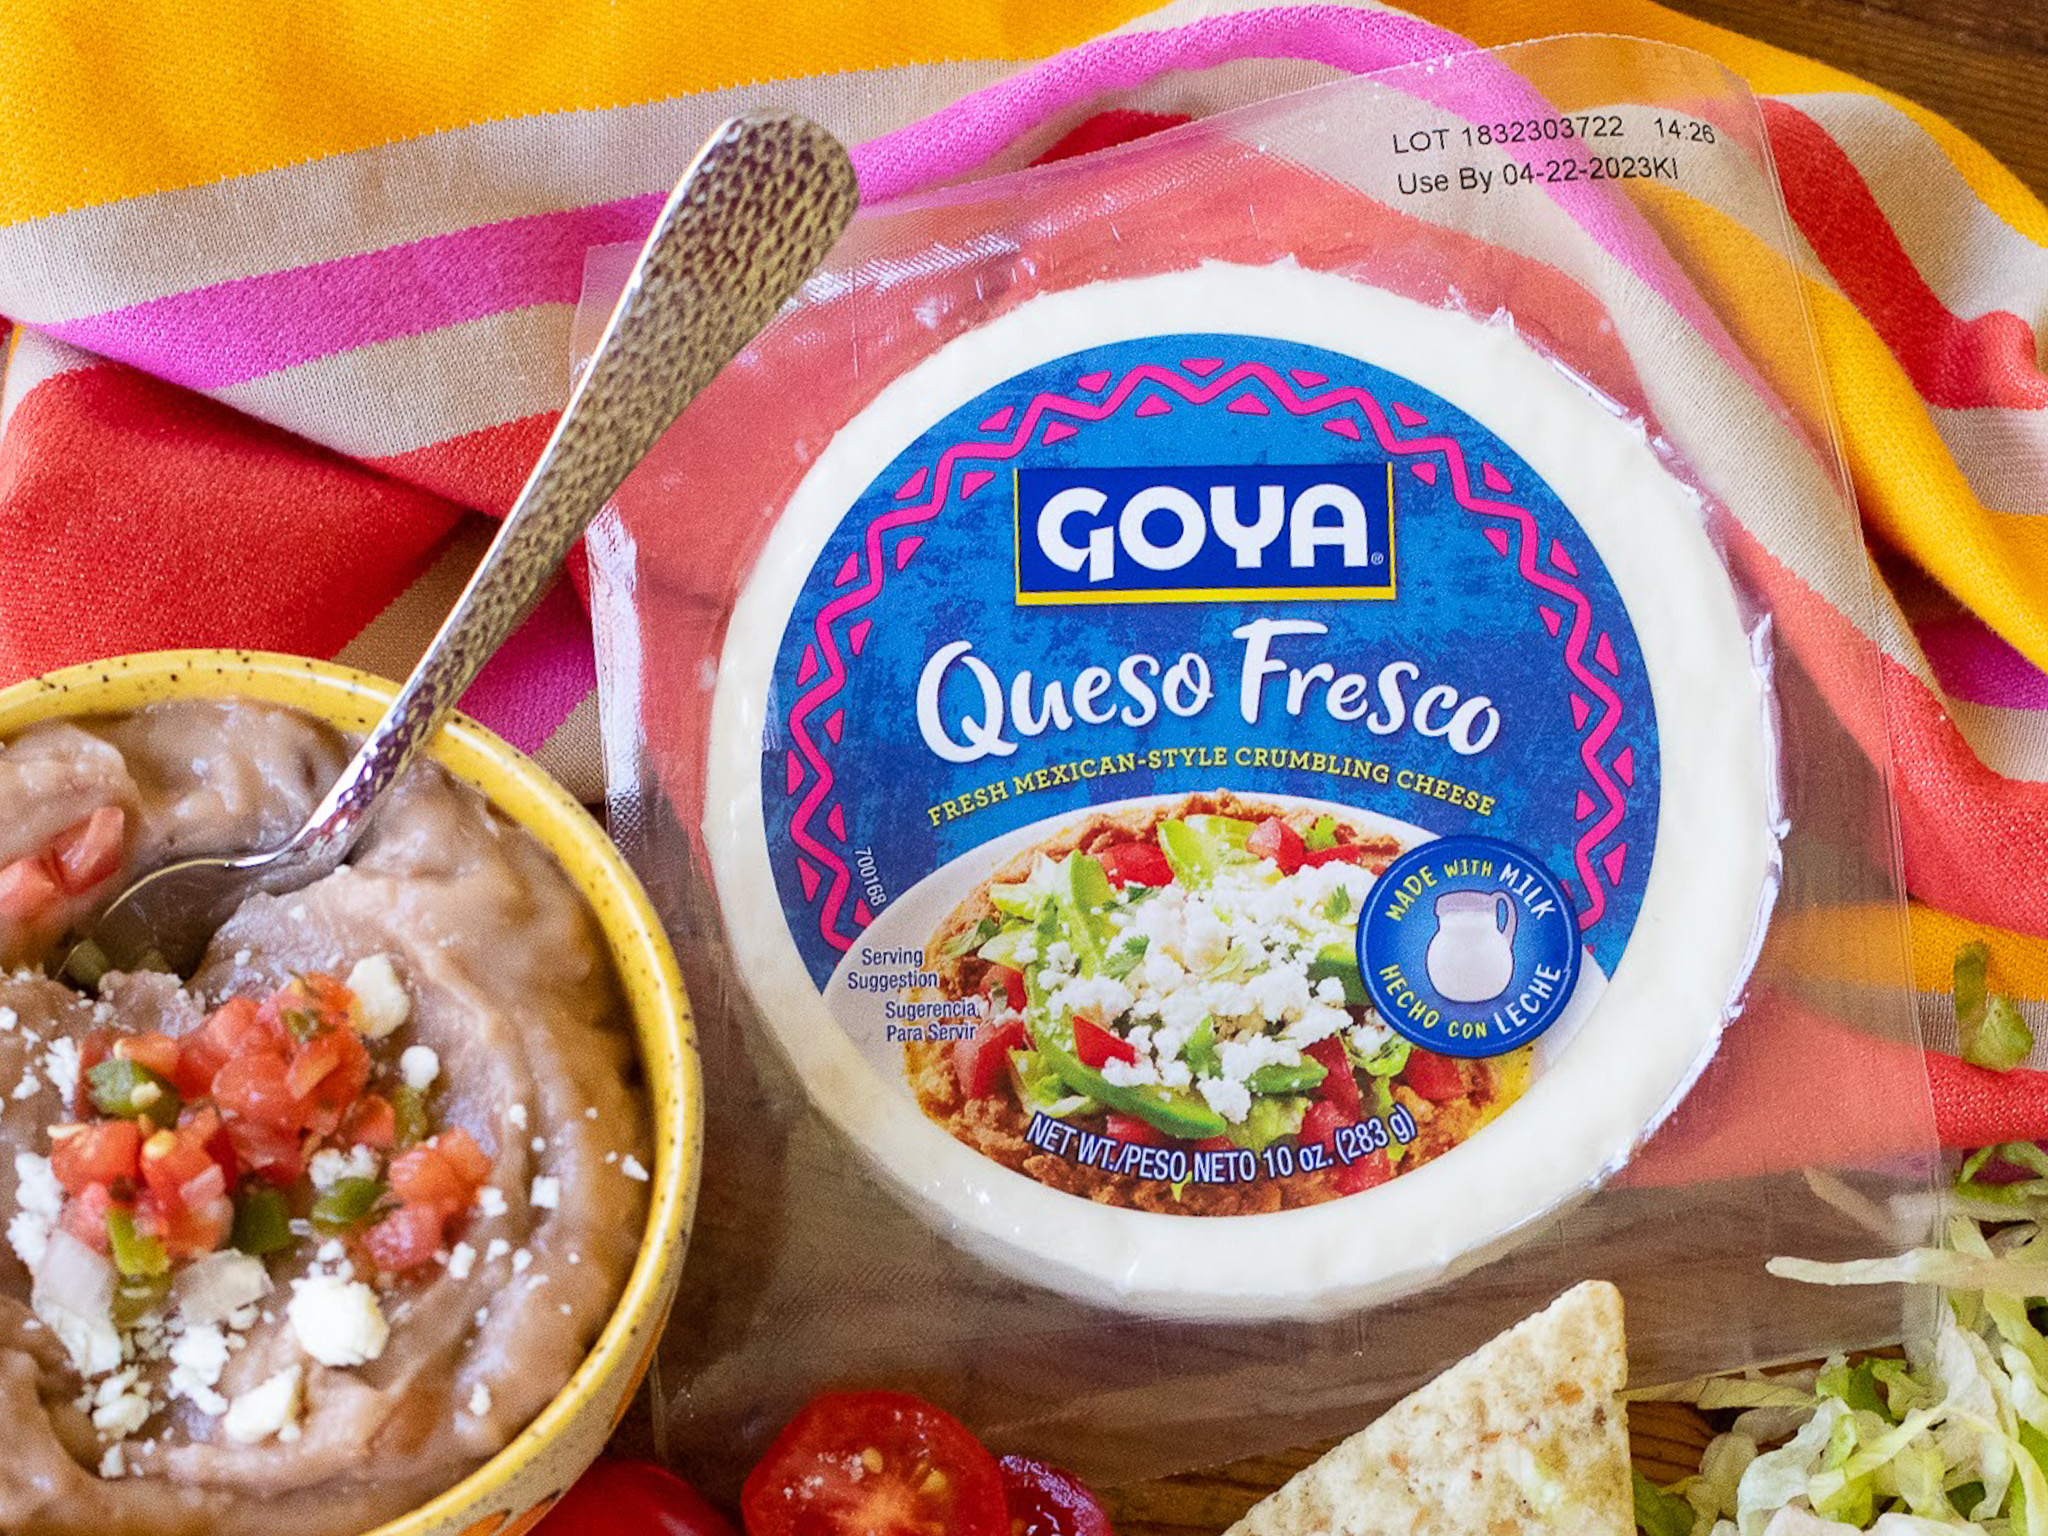 Get Goya Queso Fresco Cheese For Just 80¢ At Publix